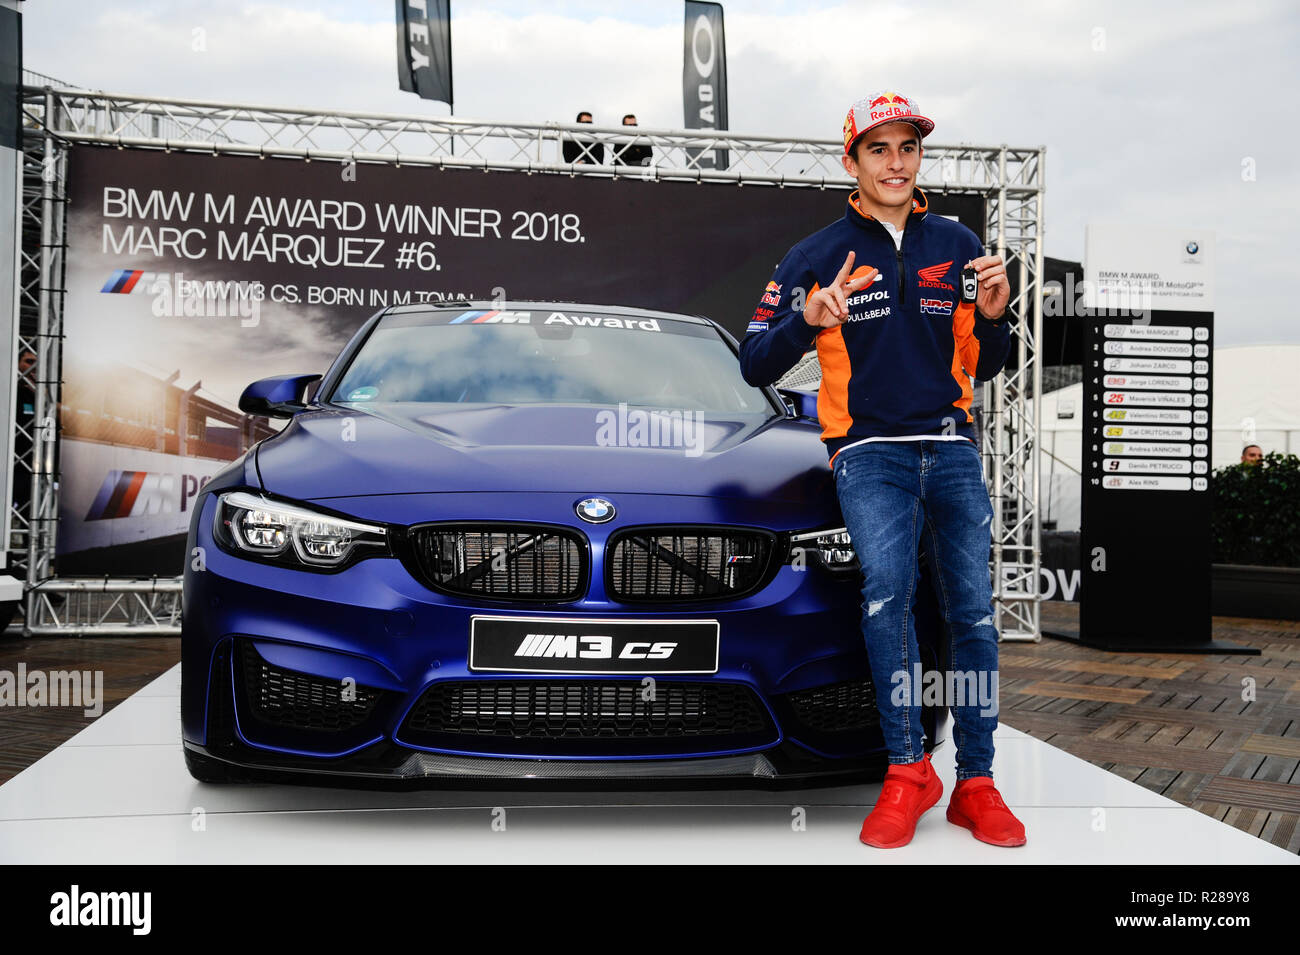 Circuit de Valencia, Valencia, Spain. 17th November 2018. MotoGP of  Valencia, qualification; BMW Awards 2018 Marc Marquez takes home the new  BMW M CS for fastest qualifying driver over the course of